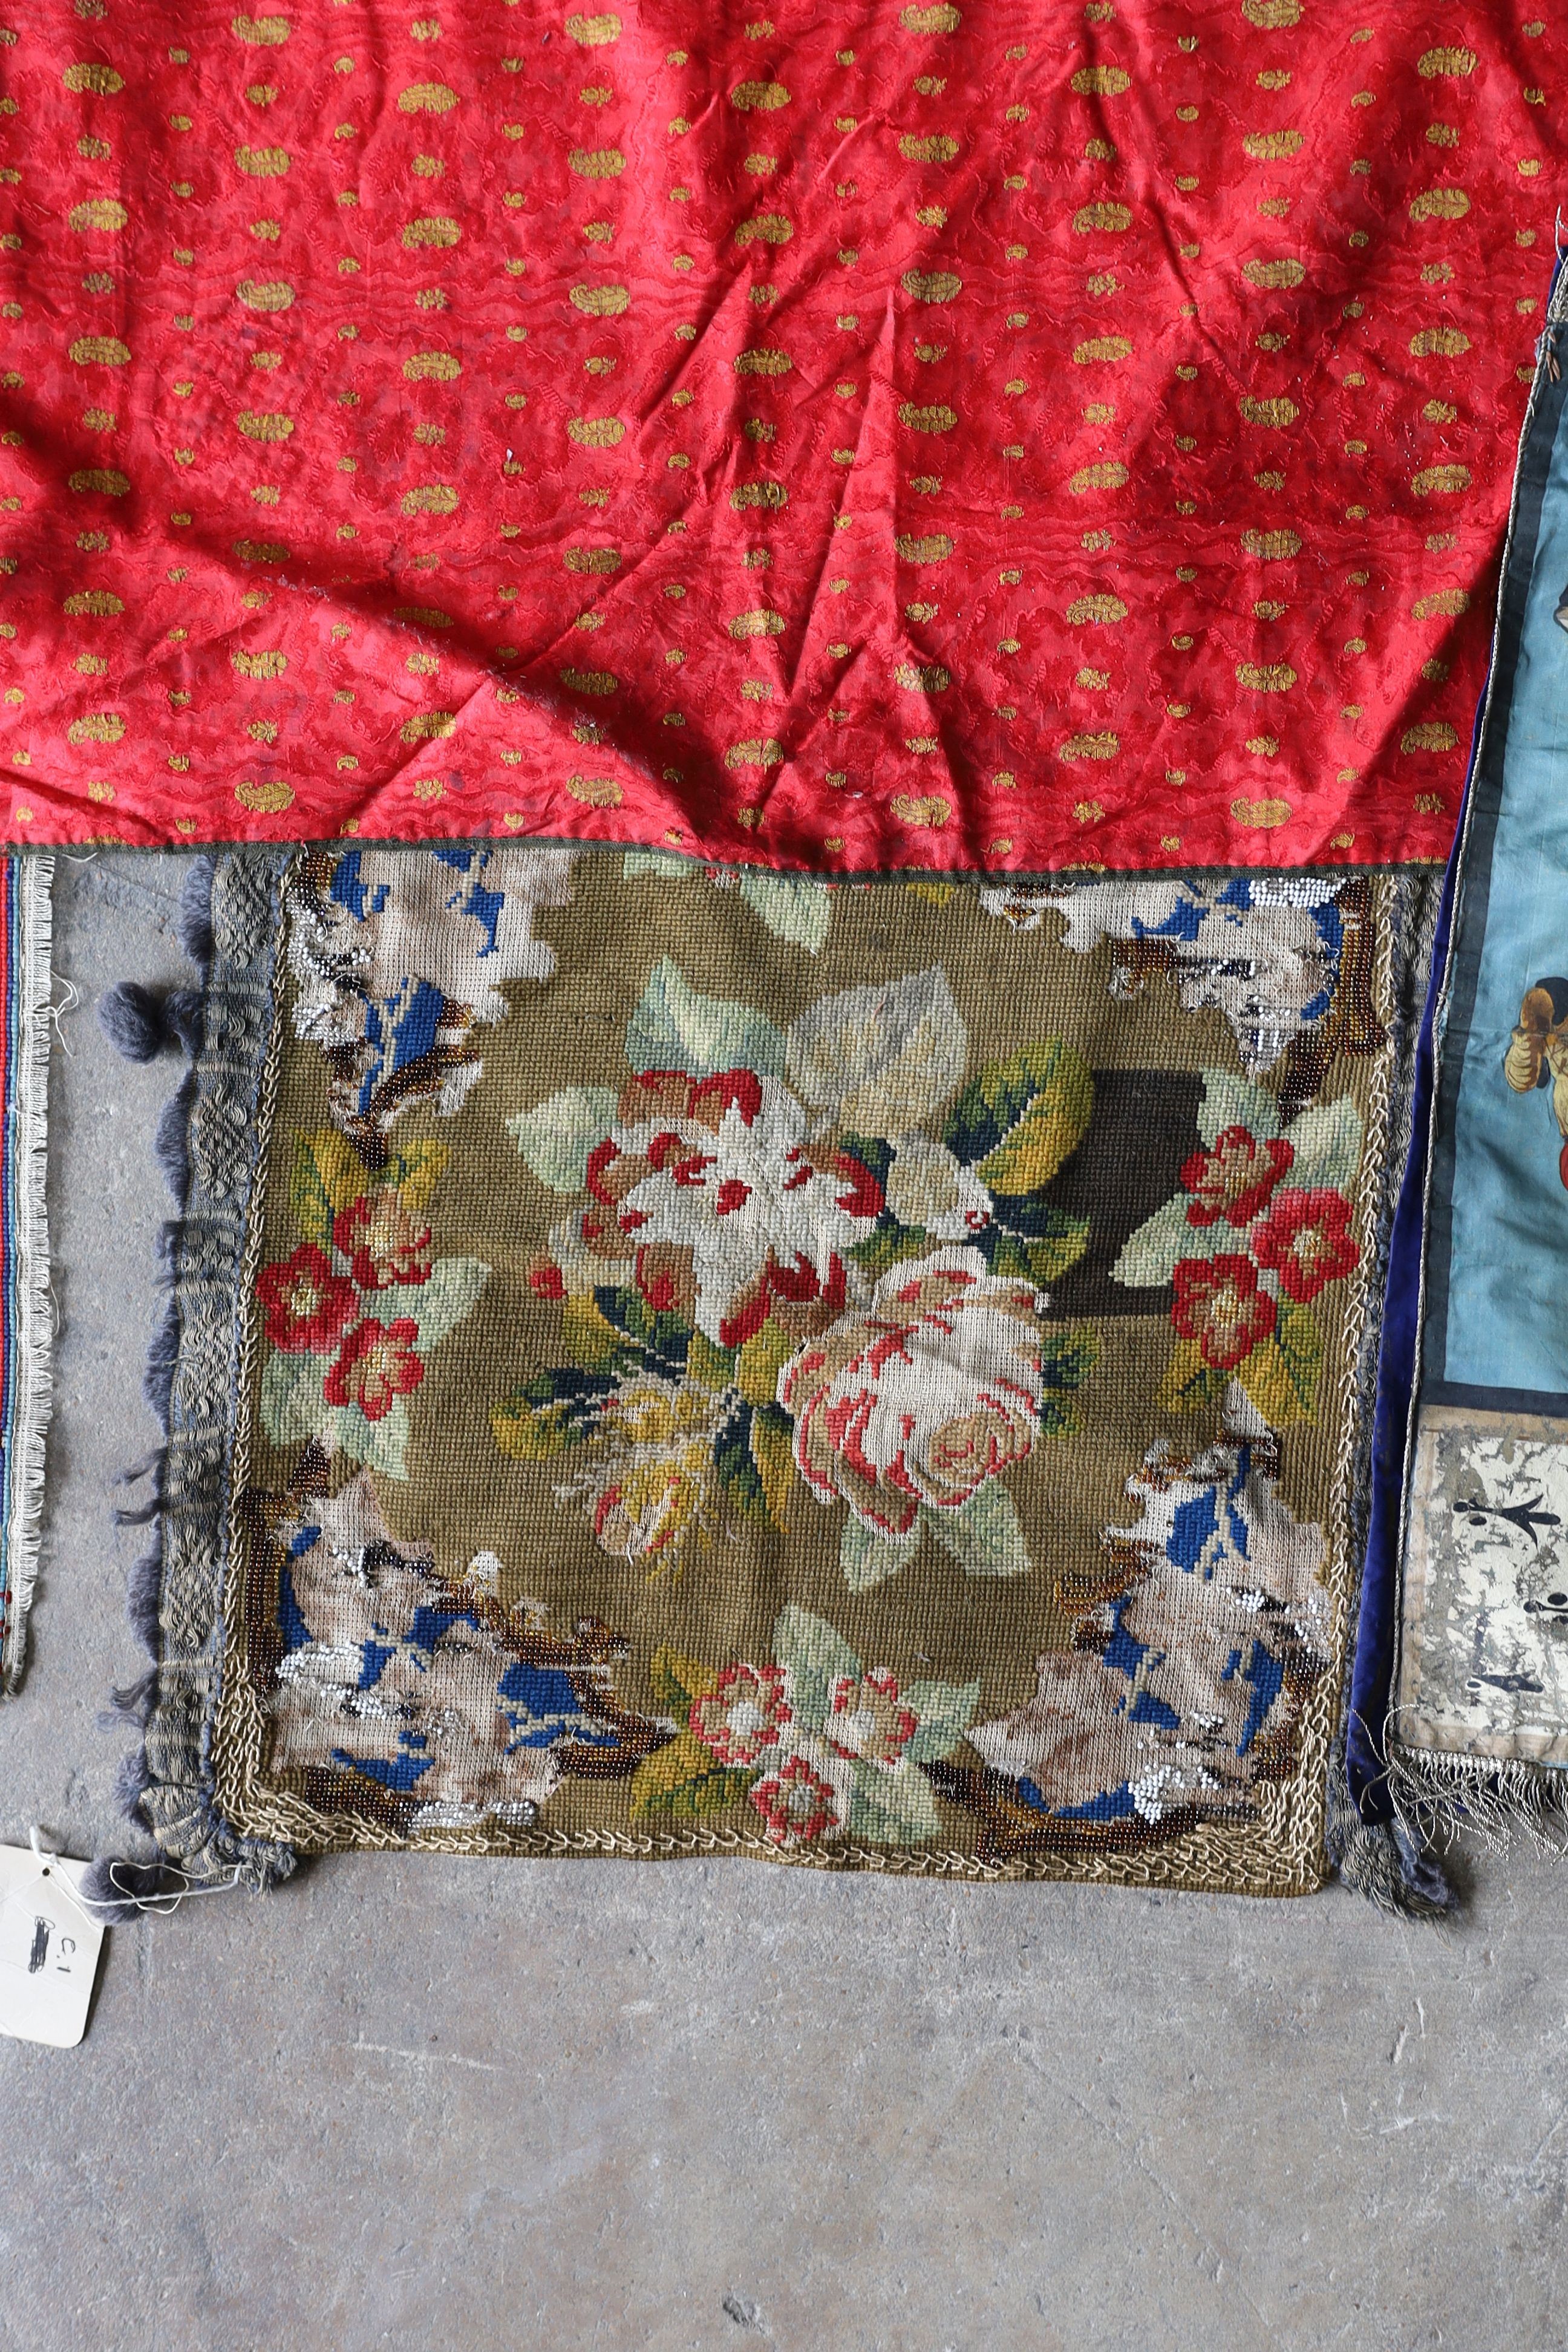 An Ottoman silk Koran cloth, three needle and bead work covers and assorted textiles